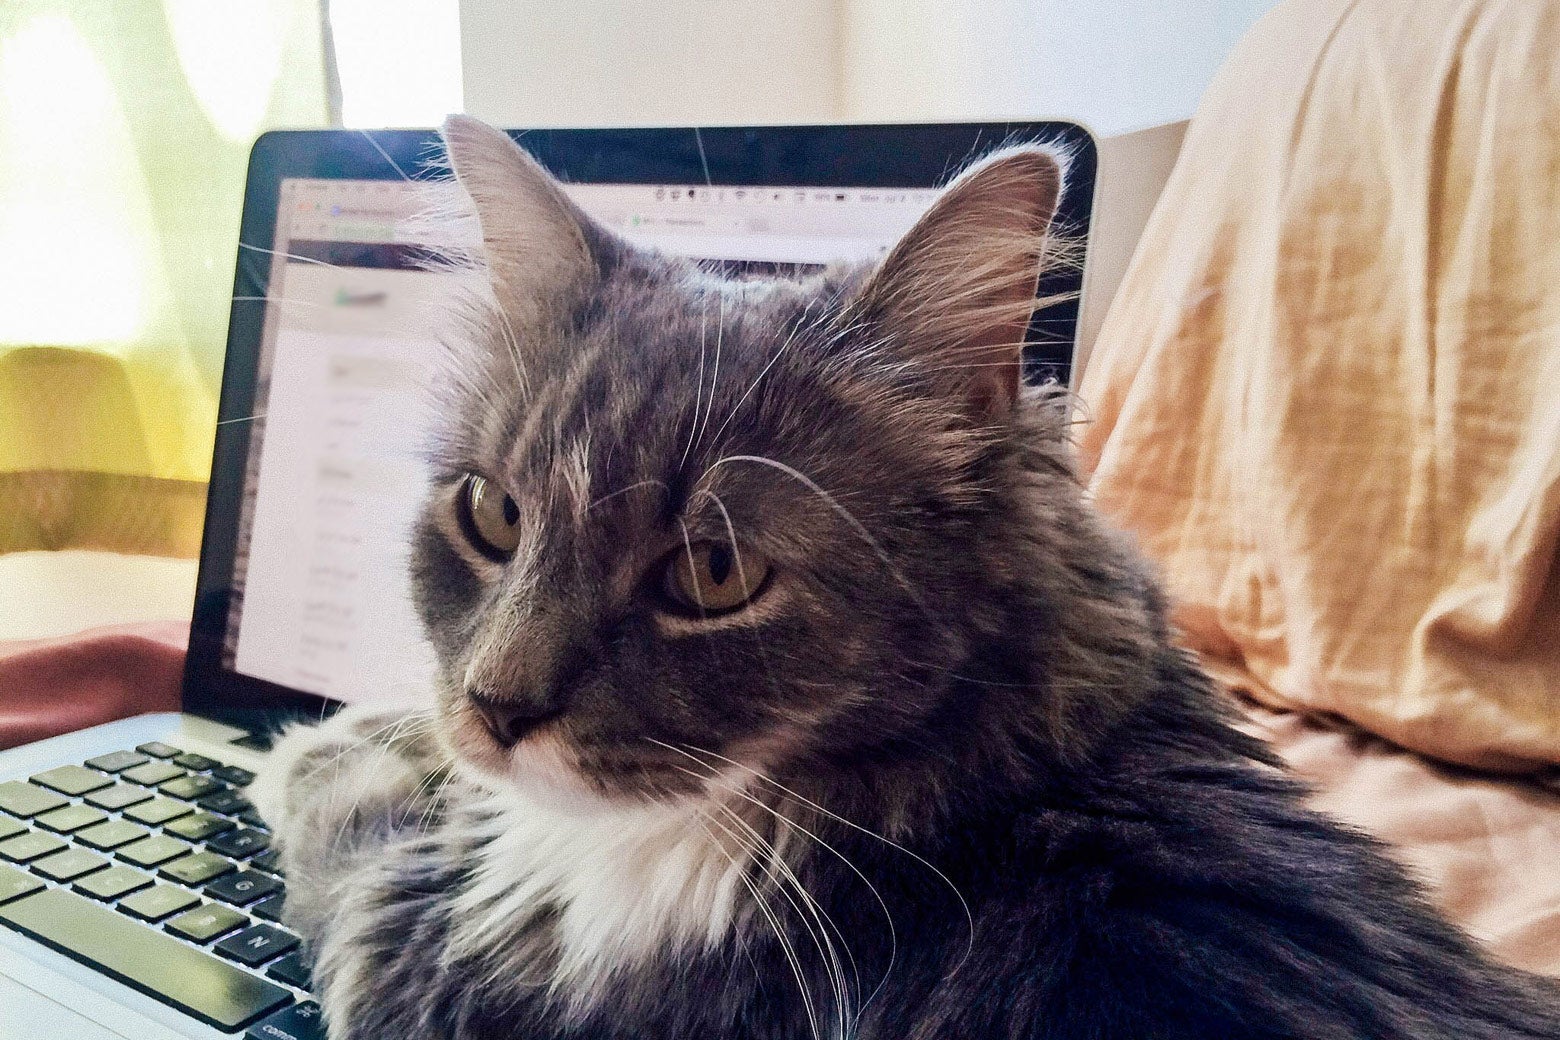 A gray-and-white cat sits on the keyboard part of an open laptop.